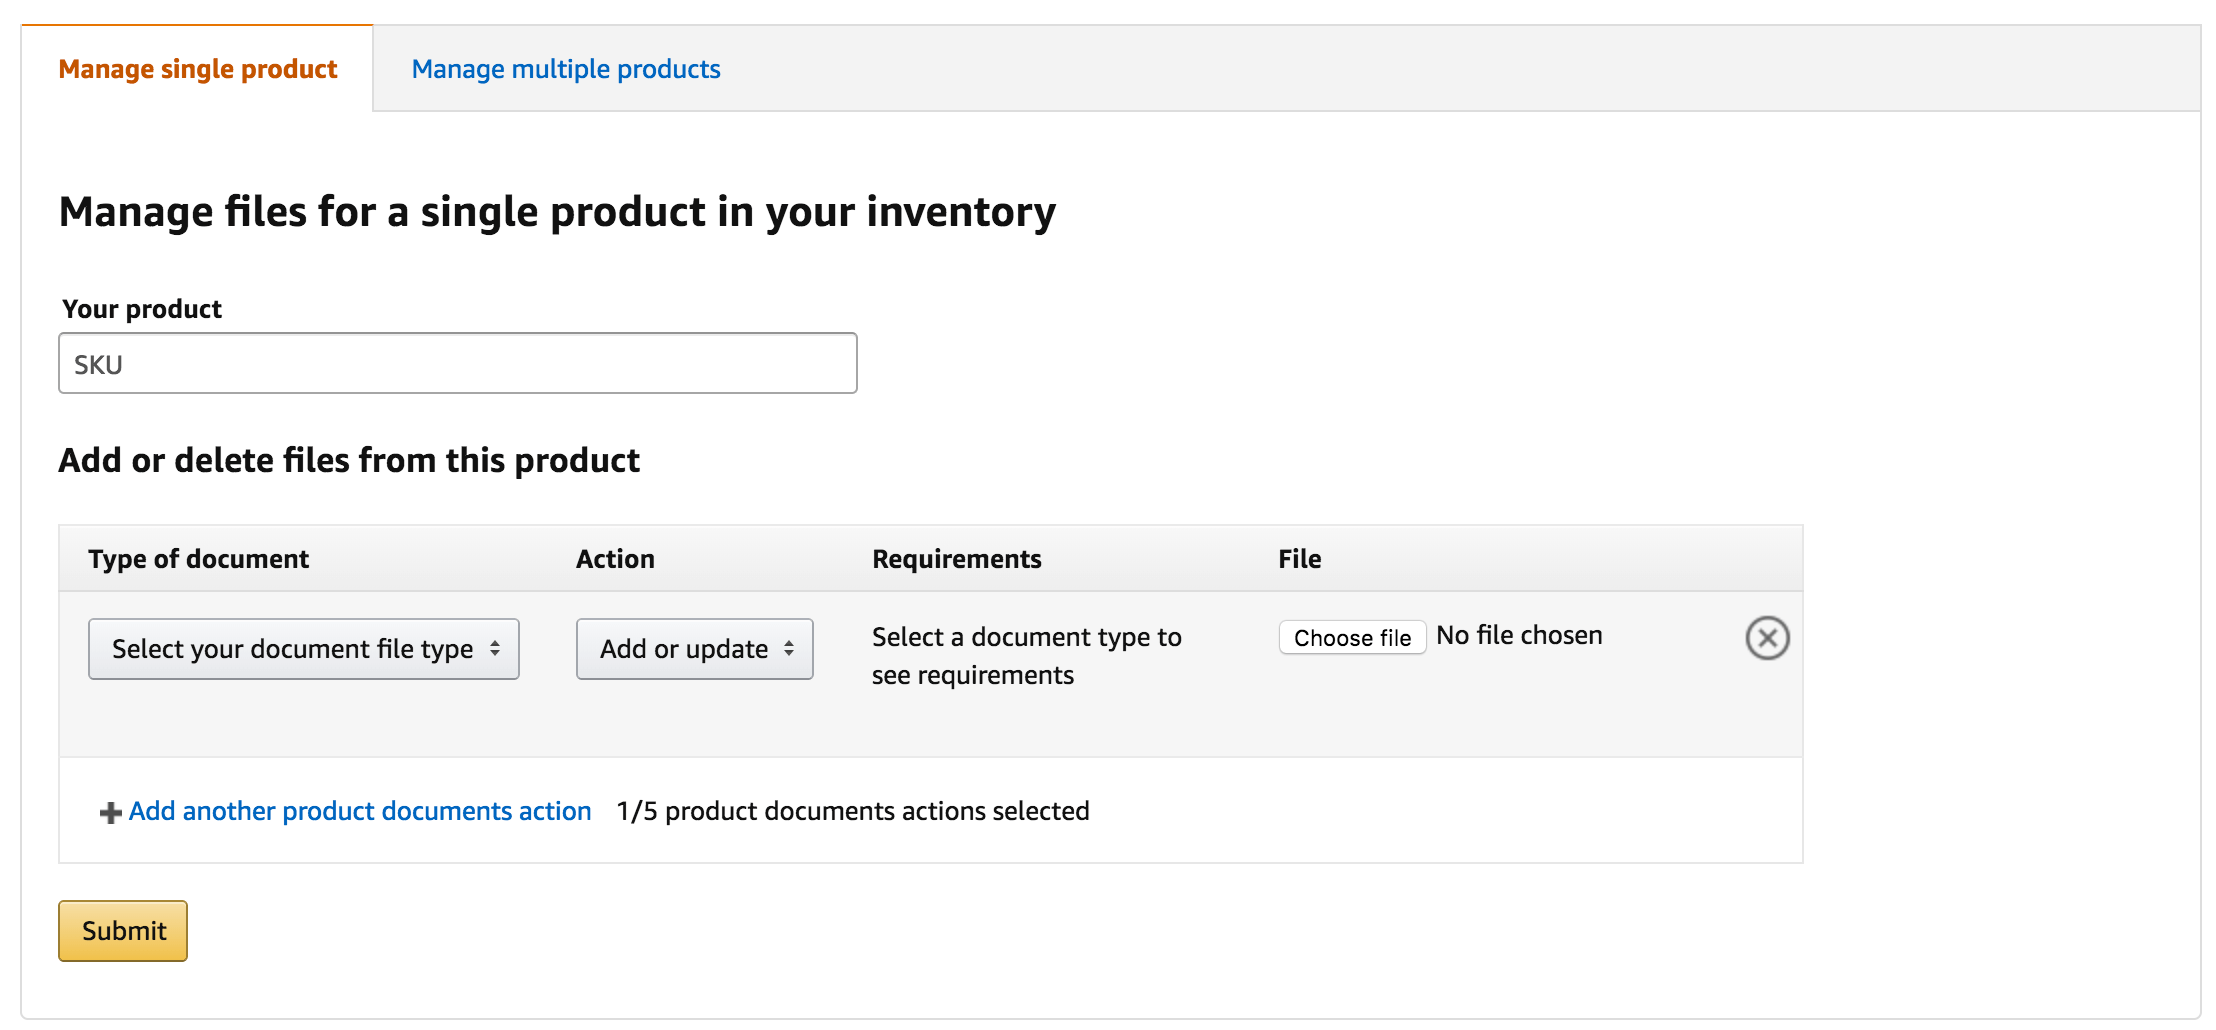 Manage files for a single product in your inventory